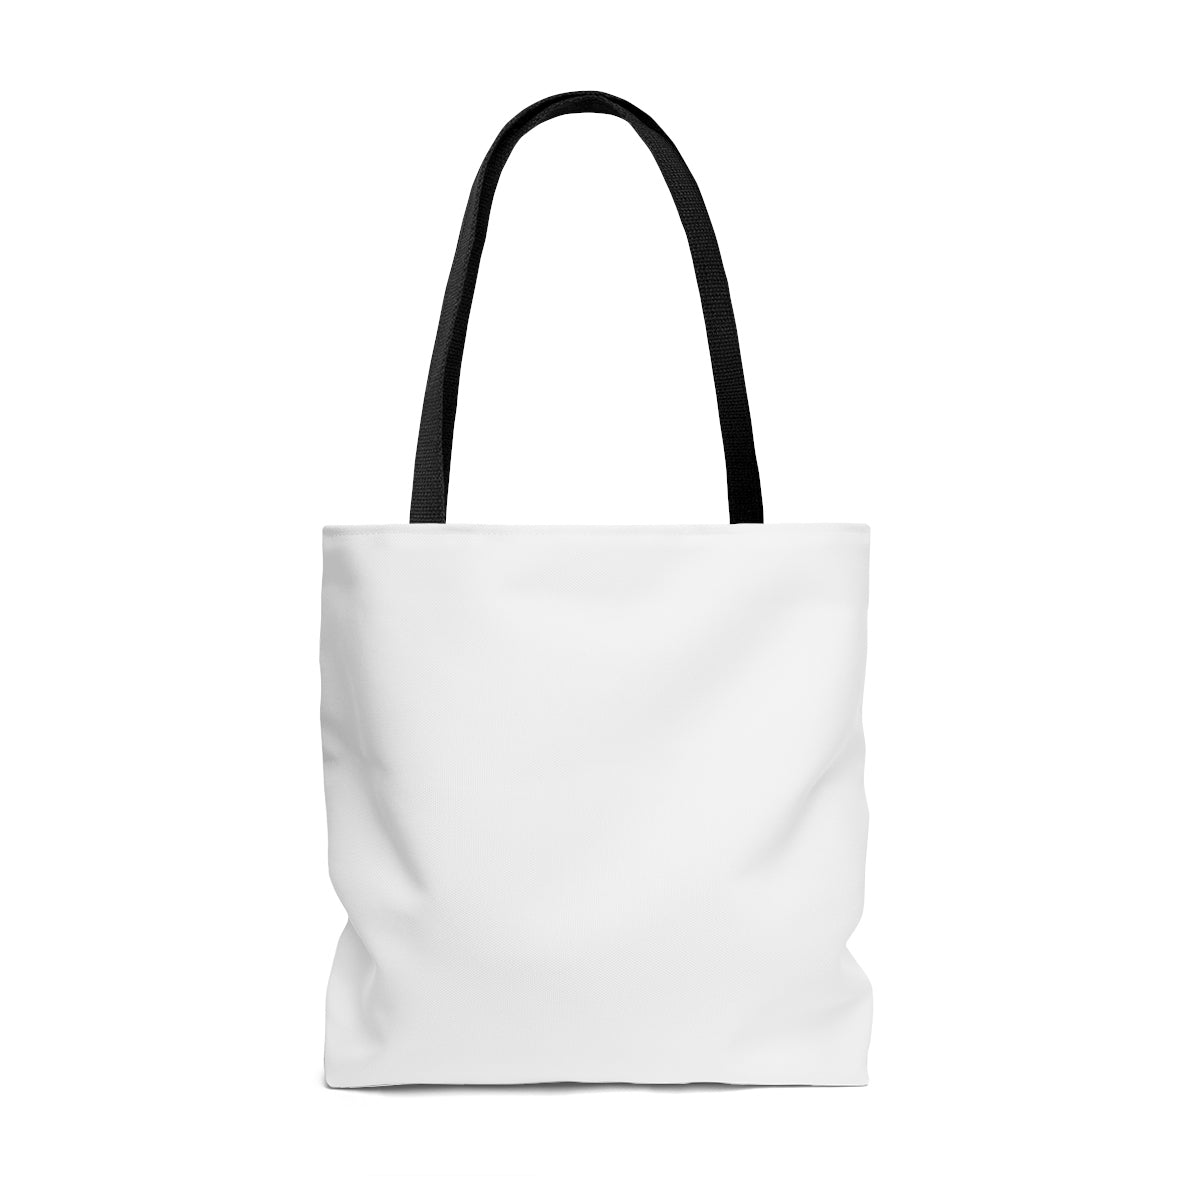 Bride of the Year Tote Bag - Crystal Flower